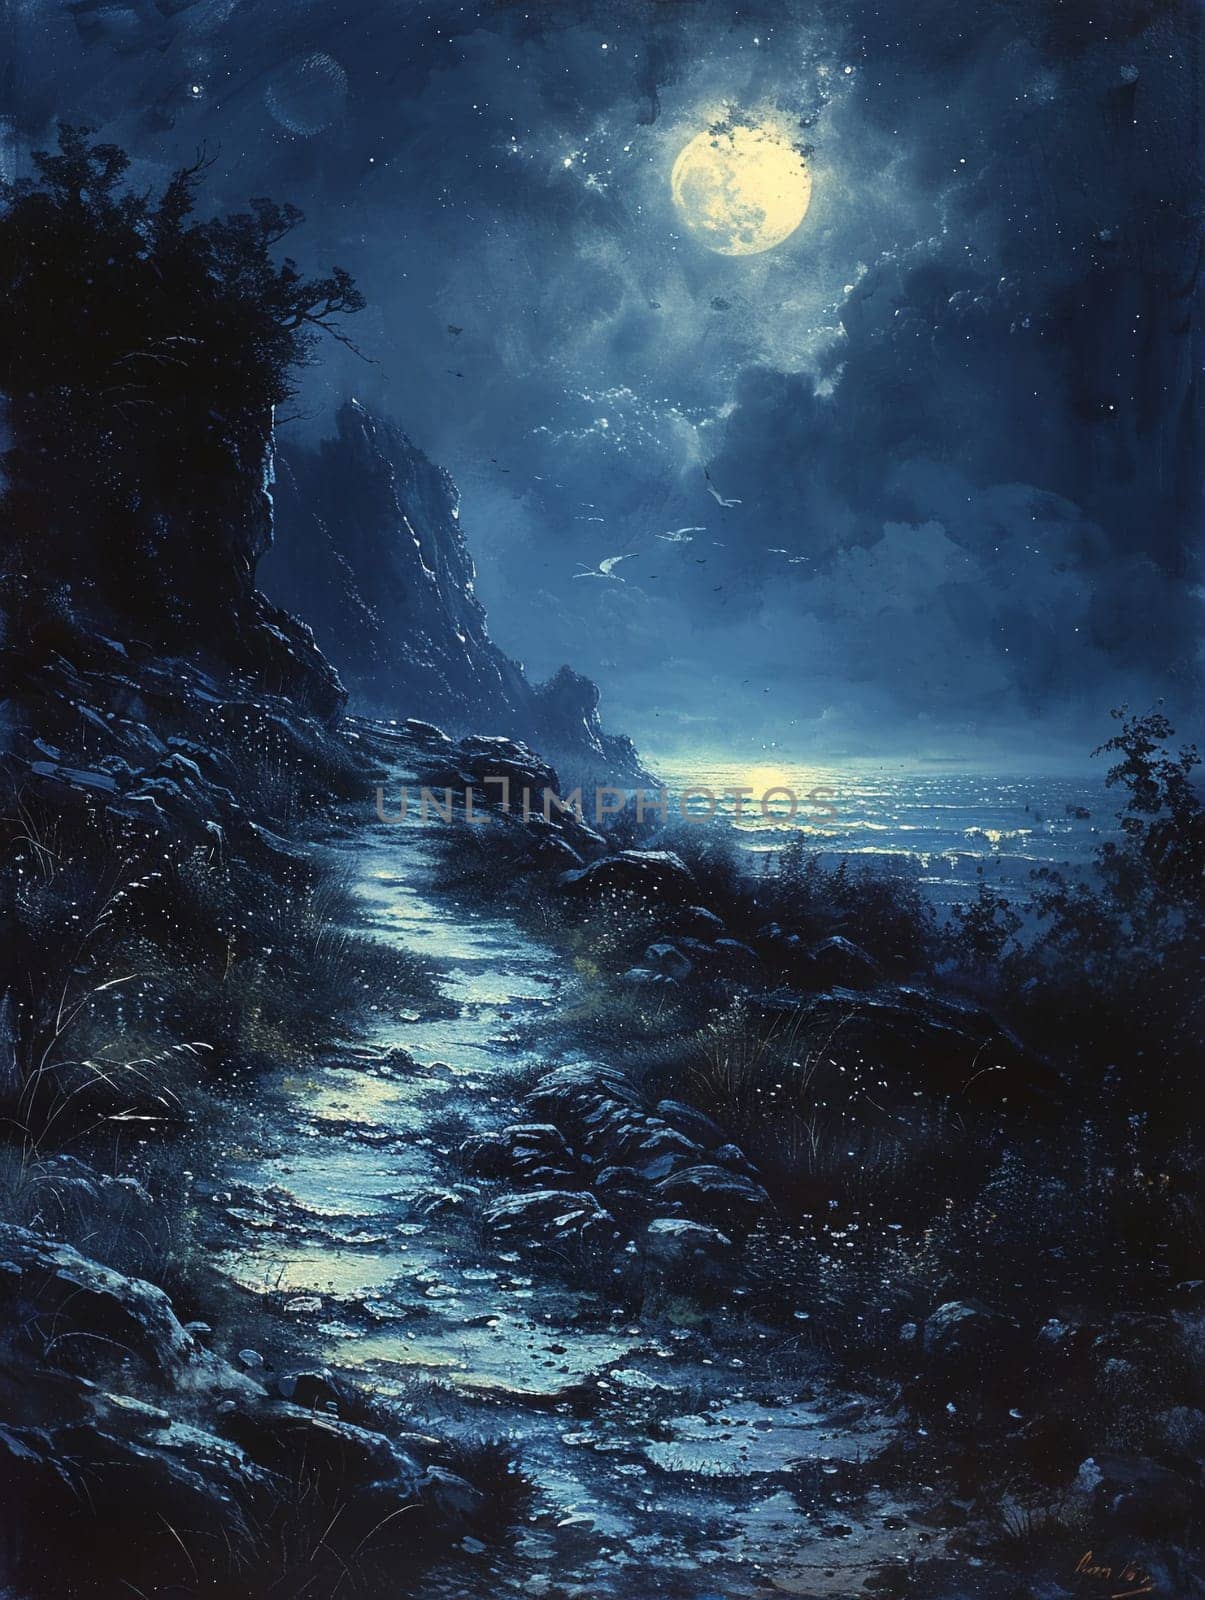 Cat's moonlit path rendered in a moody, gothic style with rich shadows and luminous highlights.